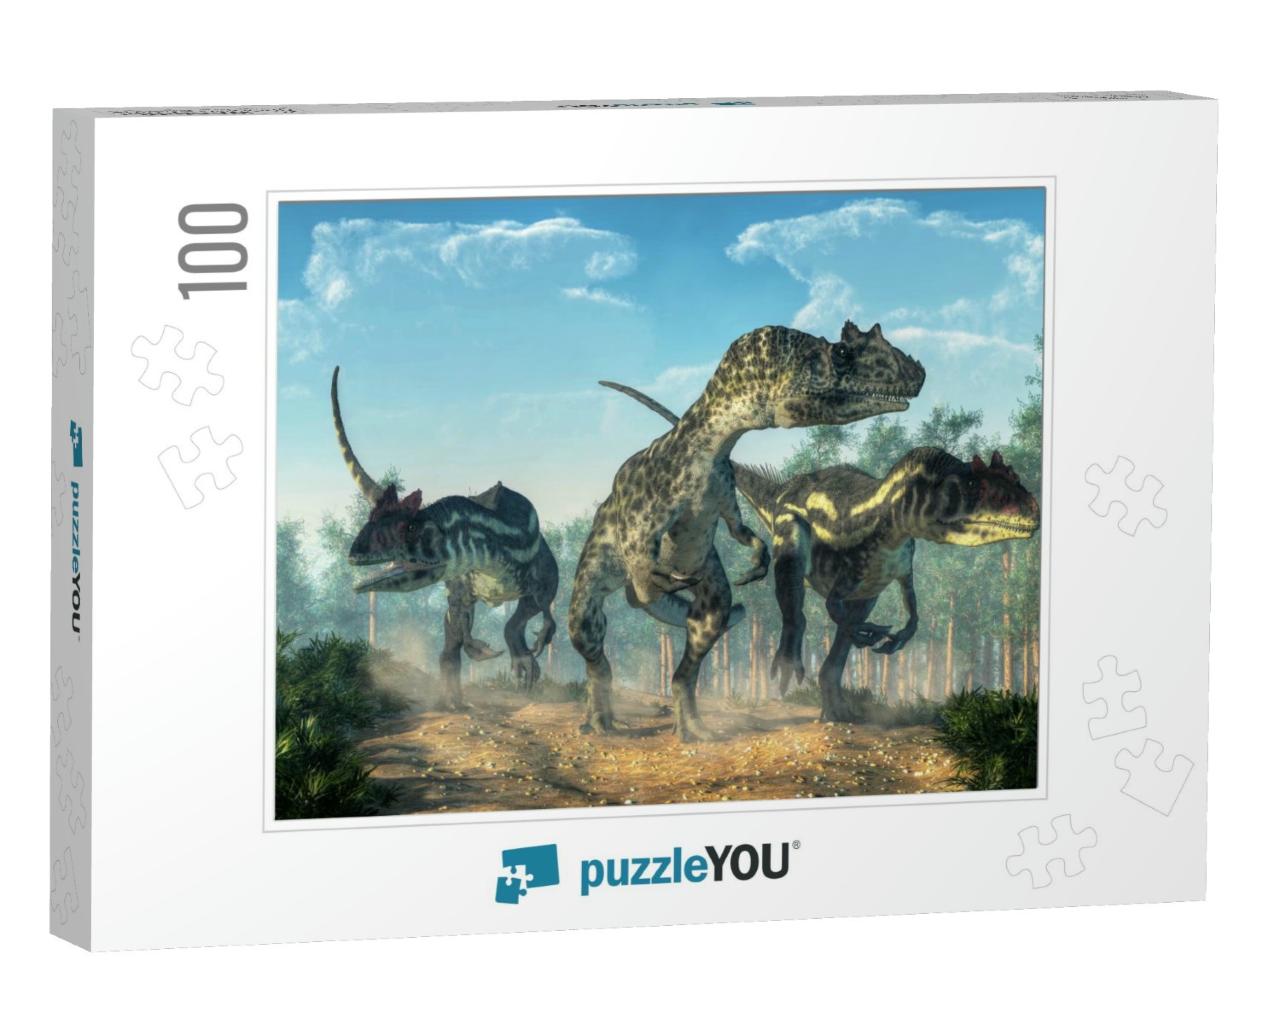 Three Allosauruses Kick Up Dust as They Hunt Along a Rock... Jigsaw Puzzle with 100 pieces